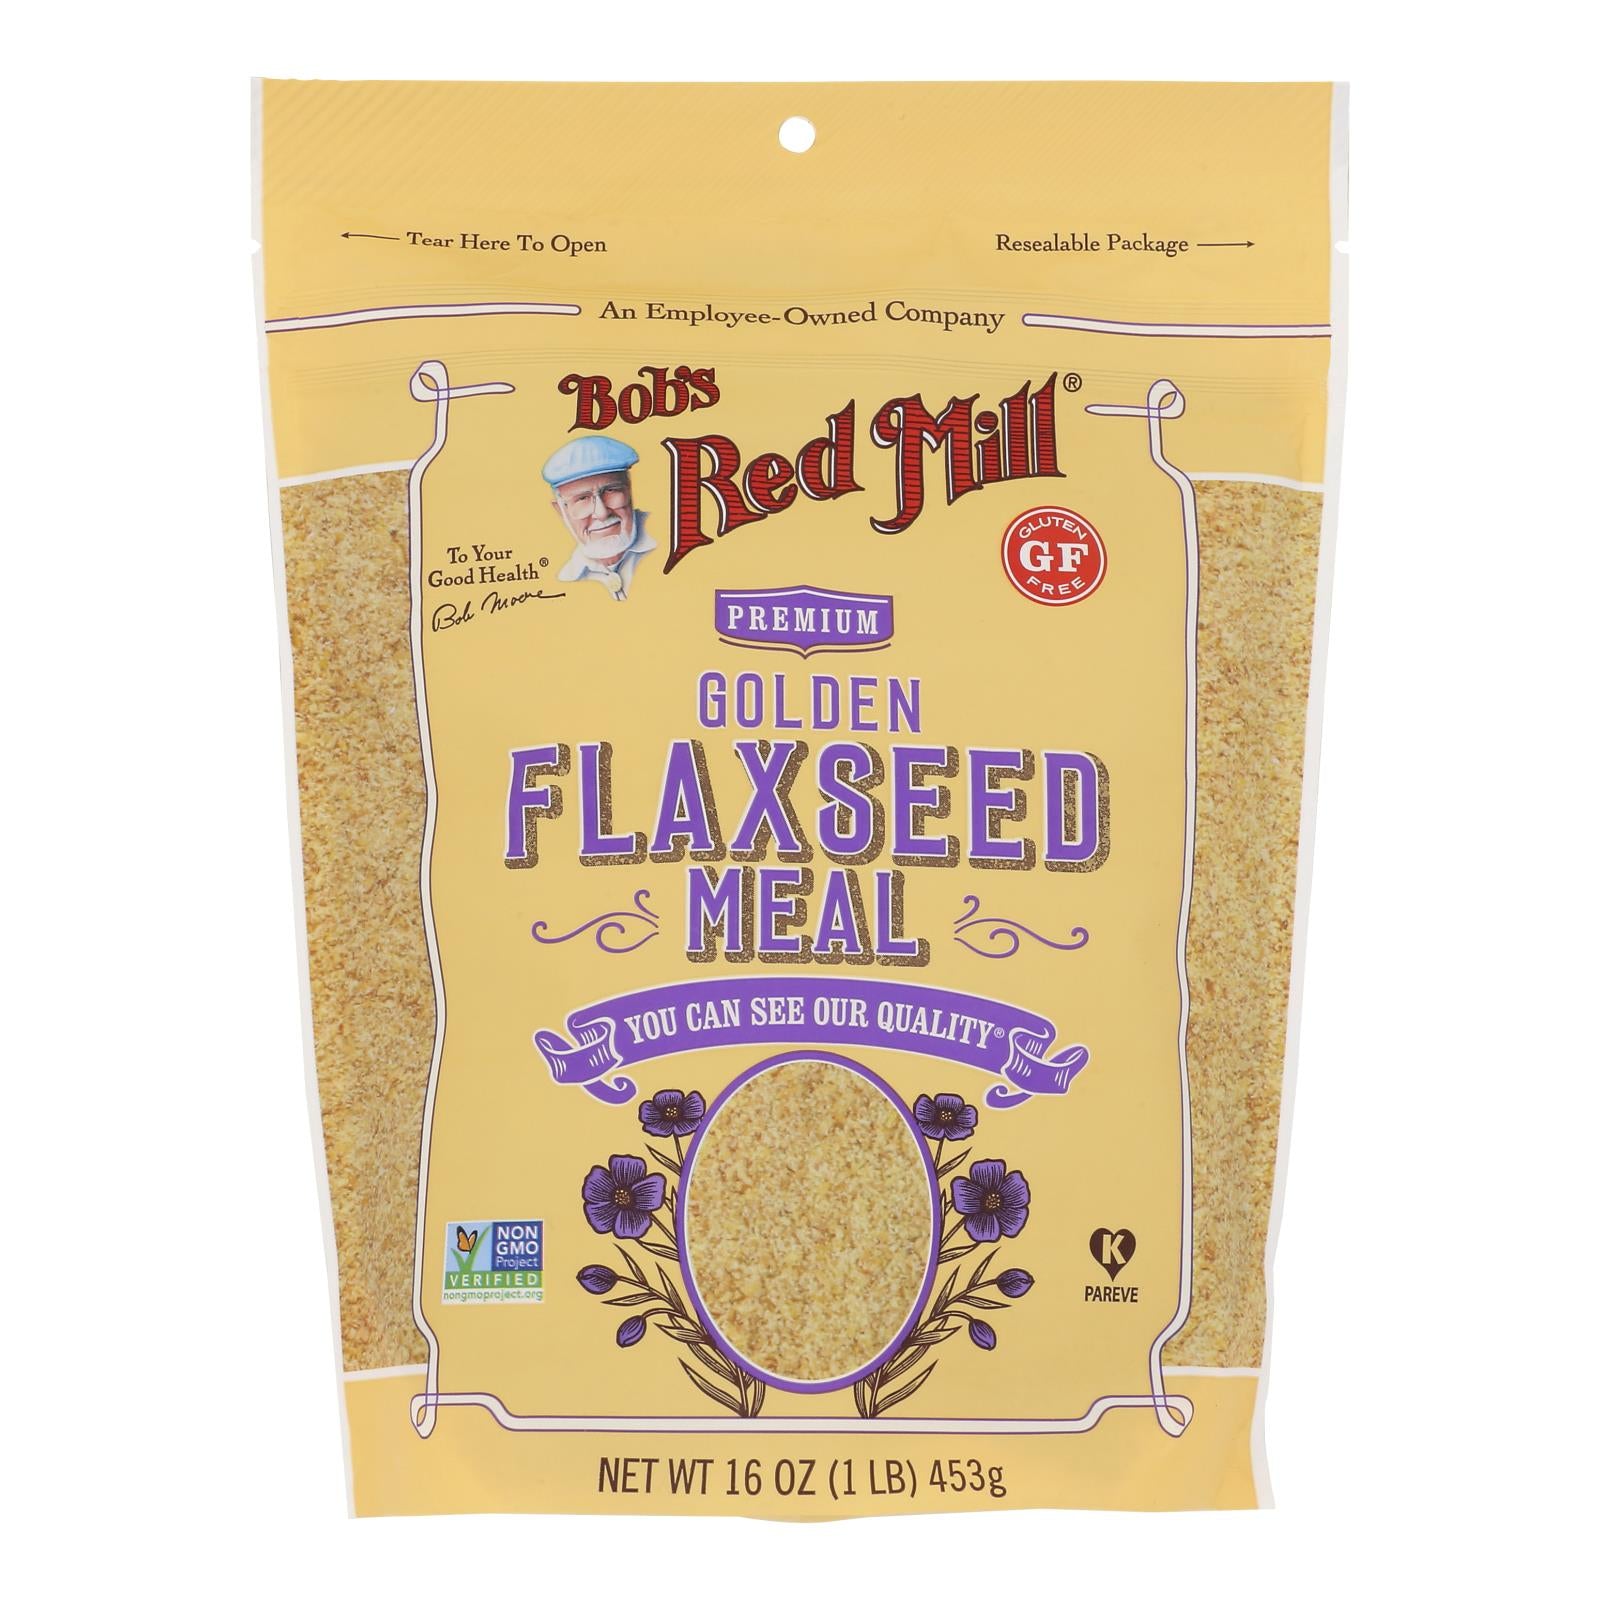 Bob's Red Mill - Flaxseed Meal - Golden - Case Of 4 - 16 Oz